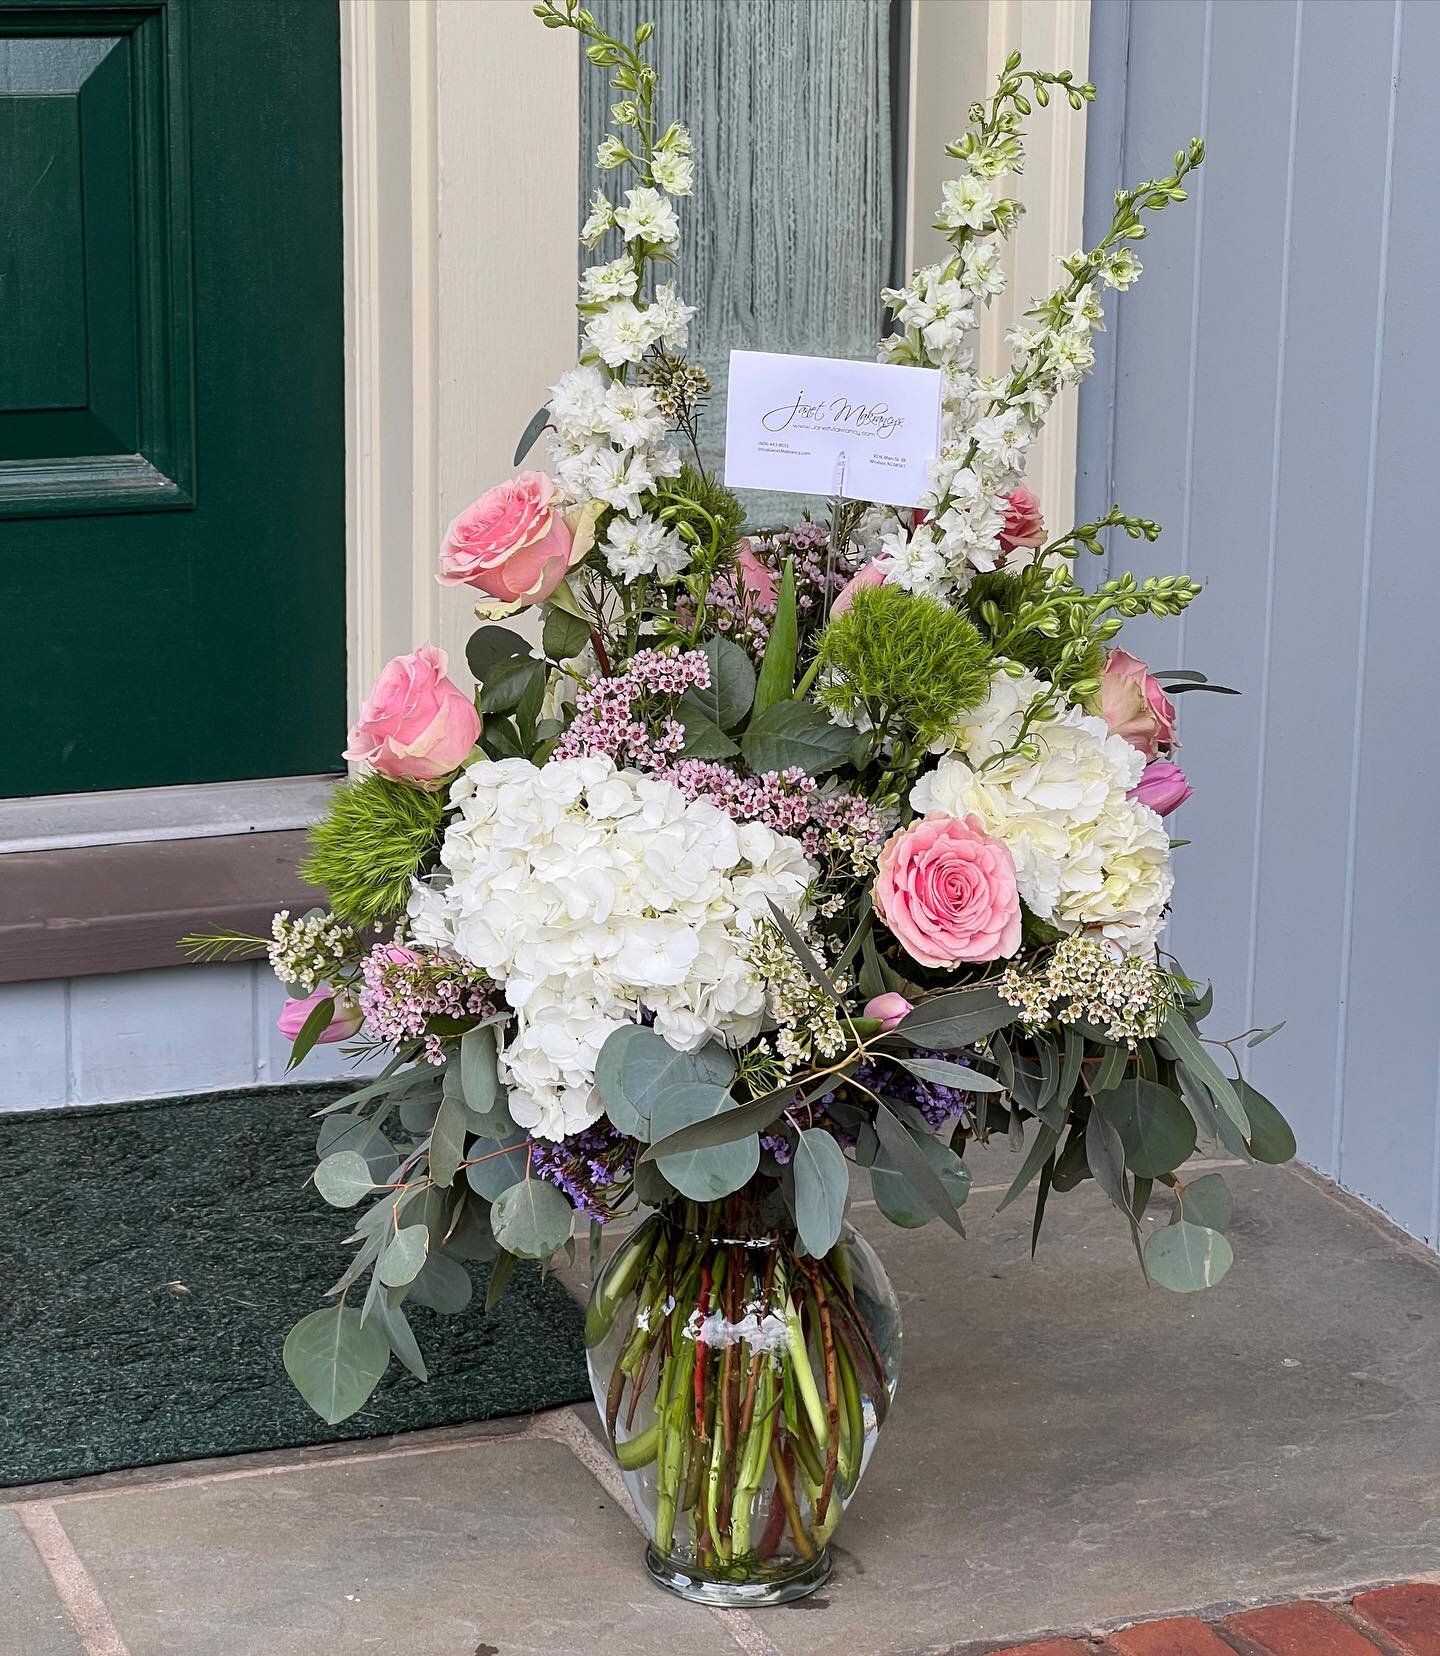 Whew! It is hot out there!
If you are sending flowers in this heat please help coordinate delivery so we can be sure to get the arrangement to your recipient on first attempt. Otherwise we hope everyone is staying cool inside! If you need a floral de